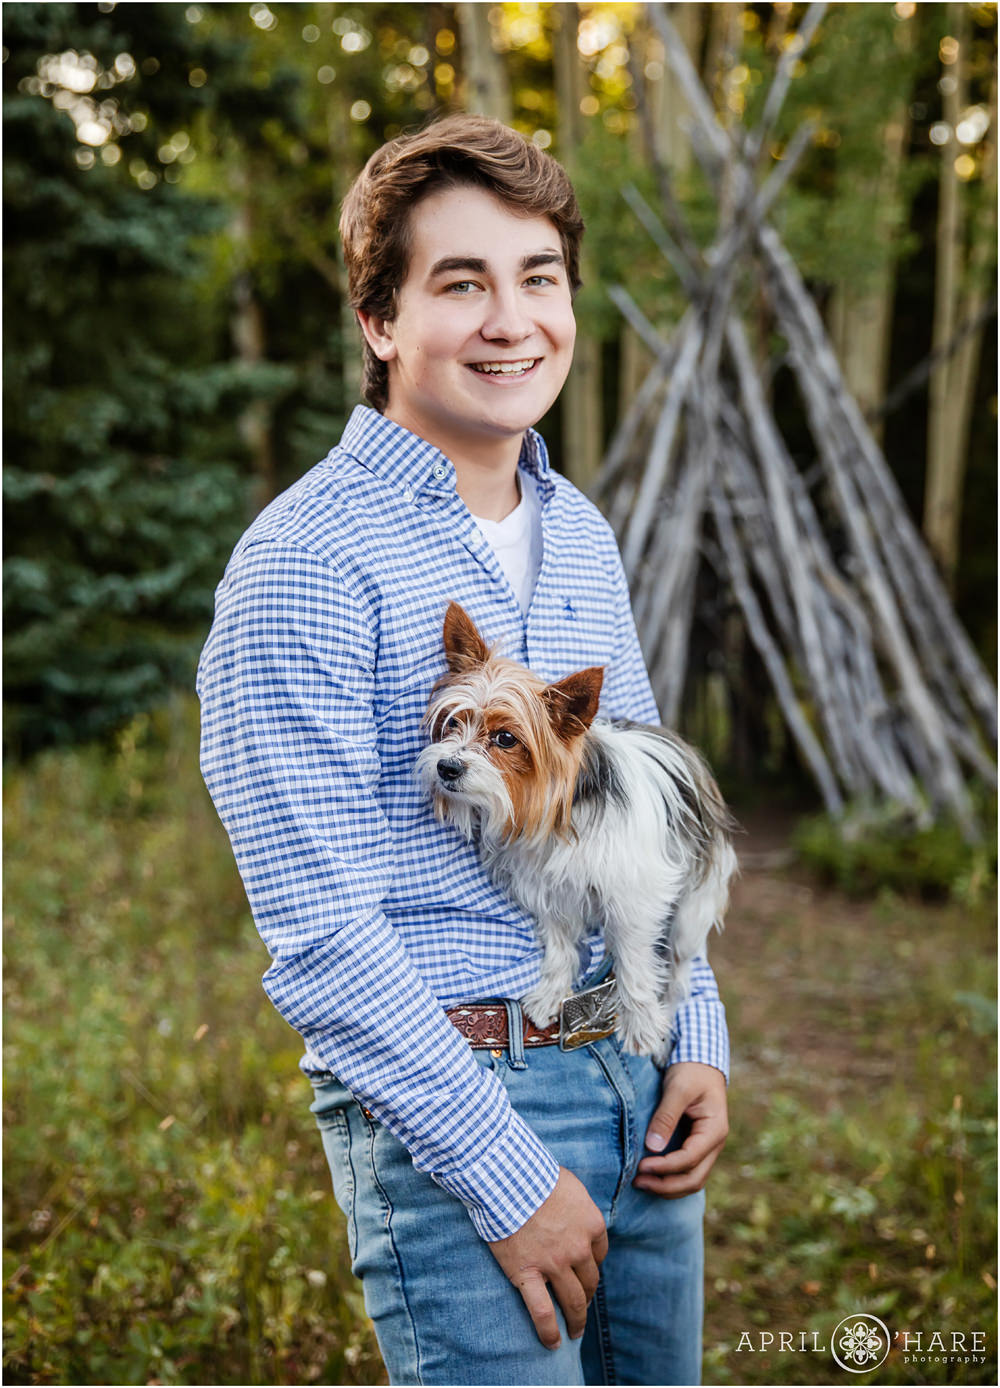 High School Senior Boy smiles as his little dog balances on his belt buckle during his Colorado senior photography session in the mountains